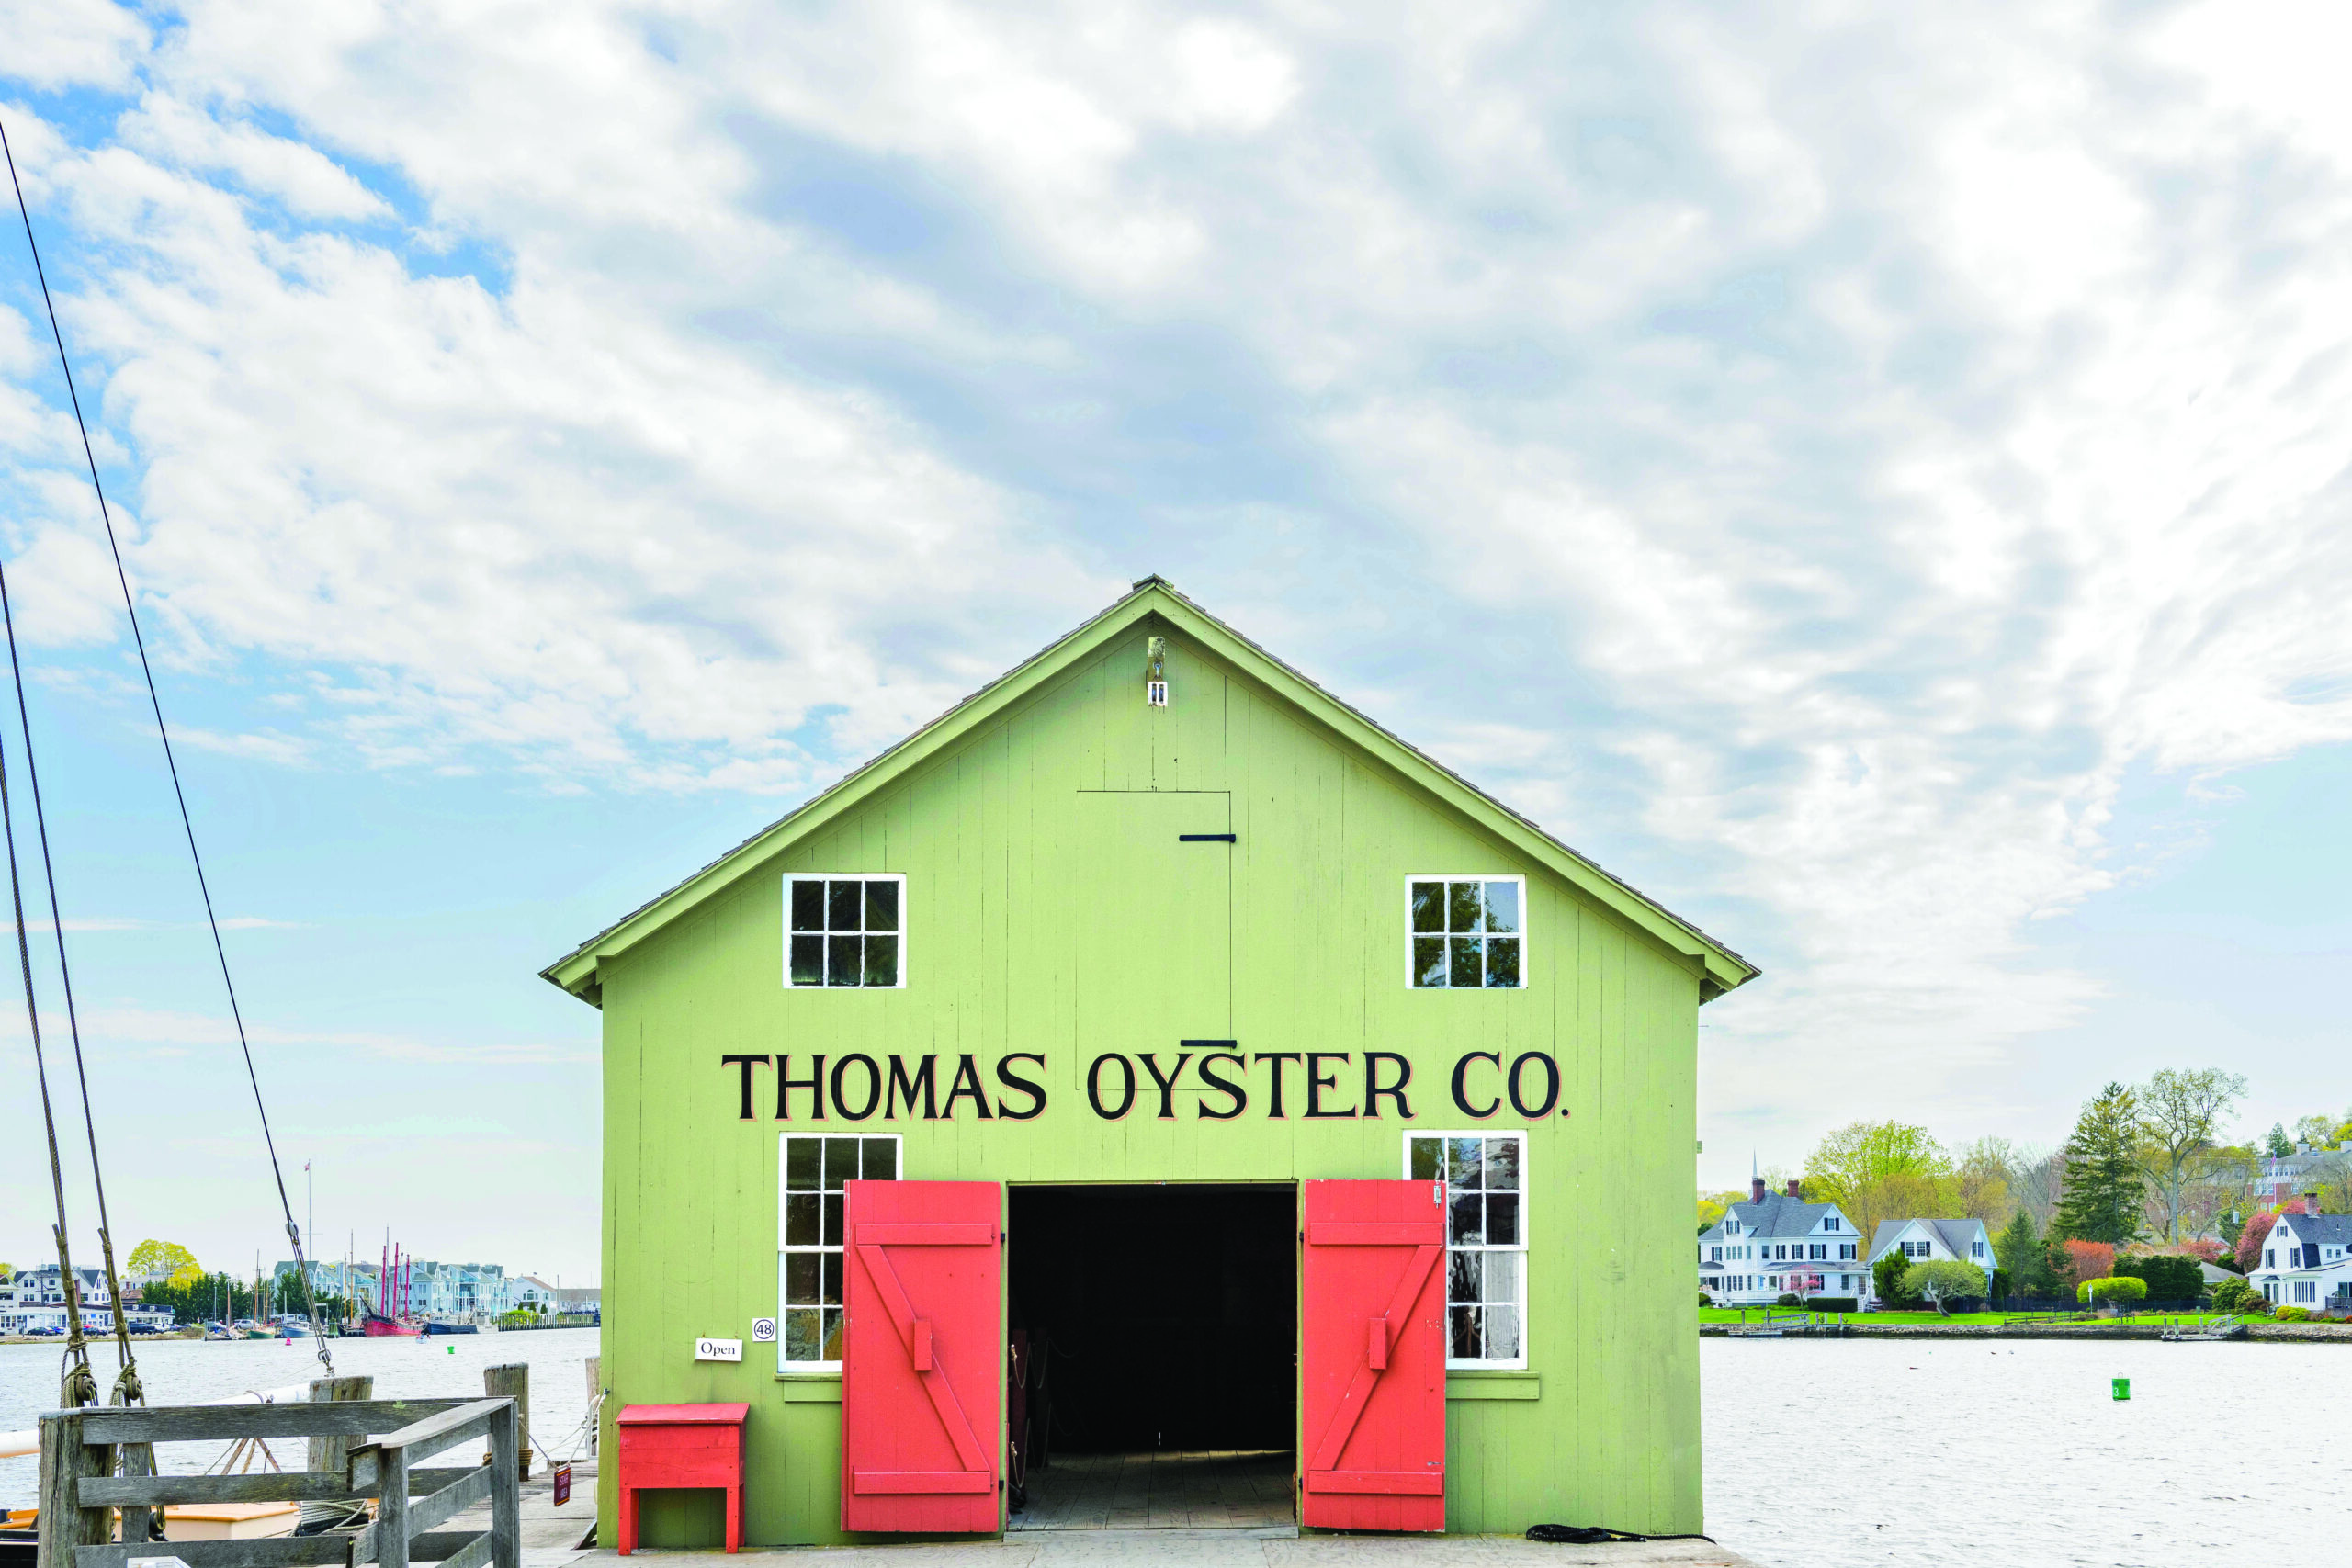 pale green building with red doors and a sign above entryway reading "thomas oyster co." The building has small windows and is situated on a dock. There's ocean and cloudy sky in the background. 